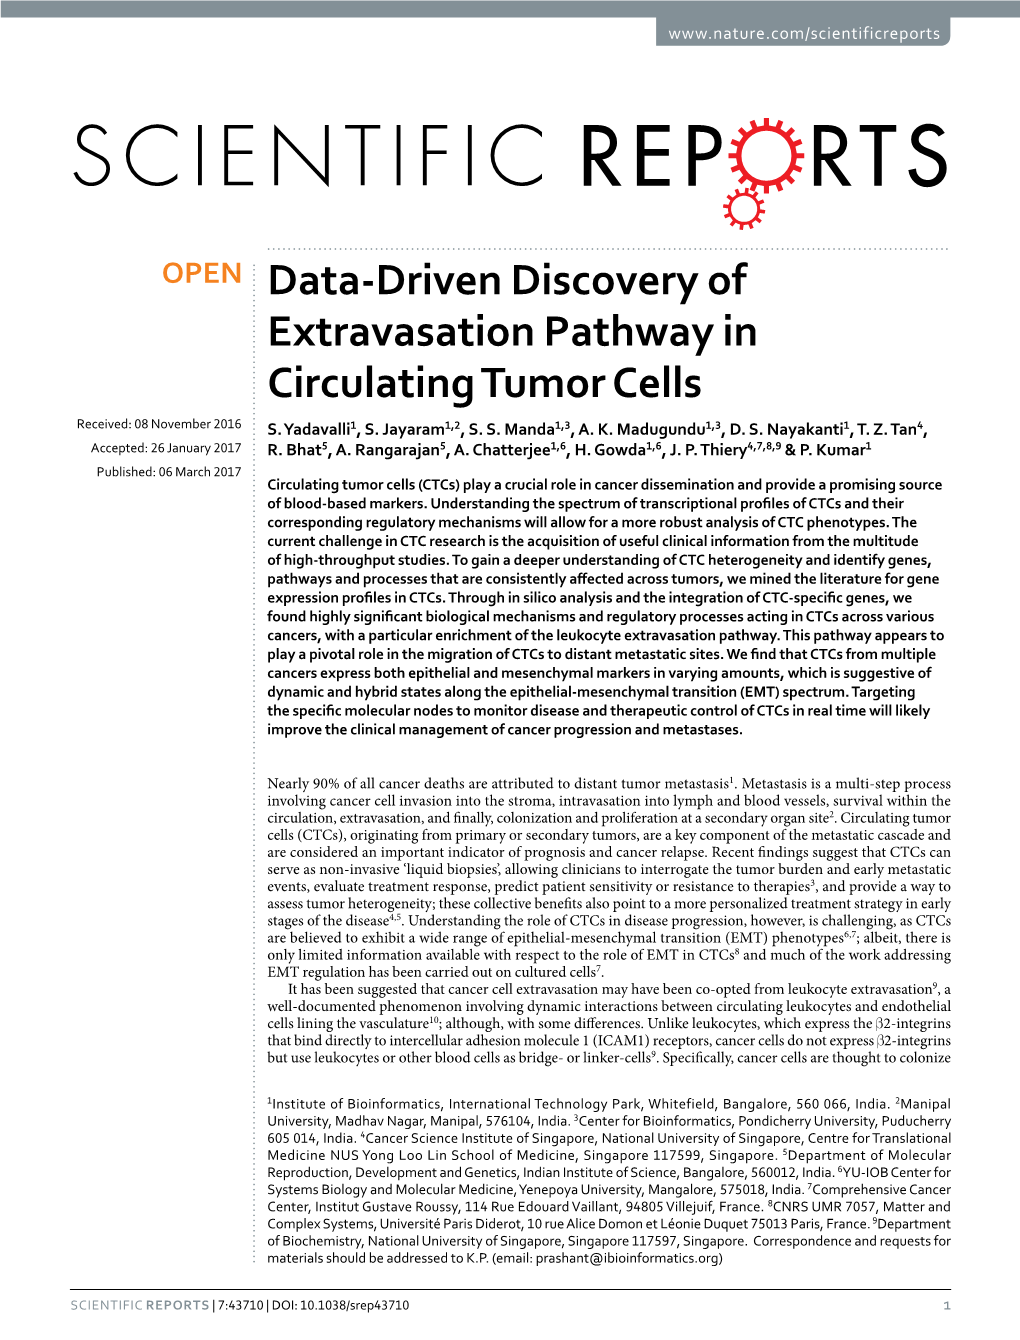 Data-Driven Discovery of Extravasation Pathway in Circulating Tumor Cells Received: 08 November 2016 S